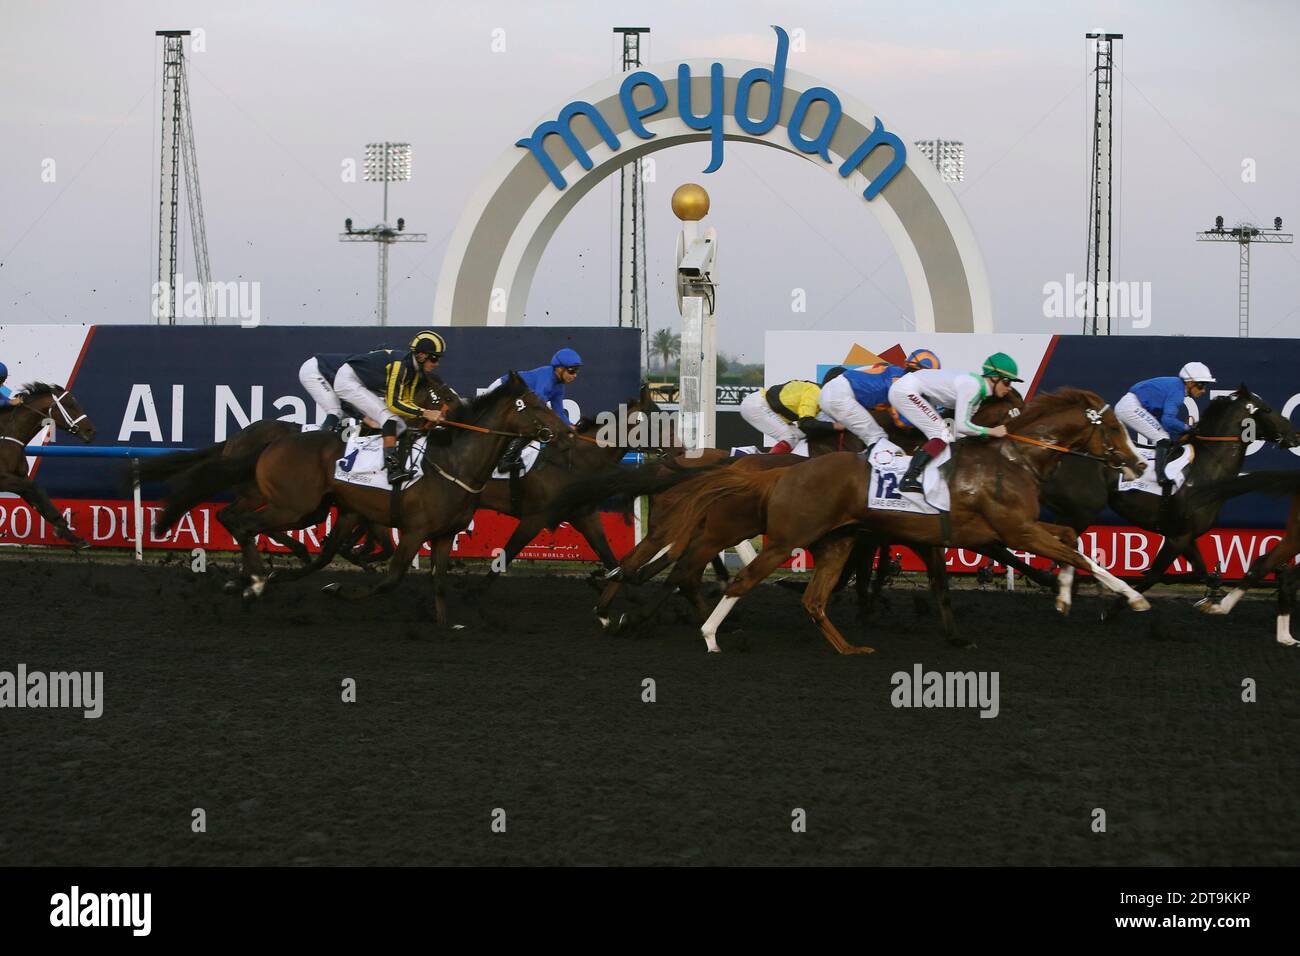 Jockeys compete in the Dubai Sheema Classic race held on Dubai World Cup day on March 29, 2013 at Meydan racecourse in Dubai, United Arab Emirates. A cosmopolitan gathering of horses from seven different countries contest the US$10 million Emirates Dubai World Cup at Meydan racecourse. Photo by Khaled Salem/ABACAPRESS.COM Stock Photo